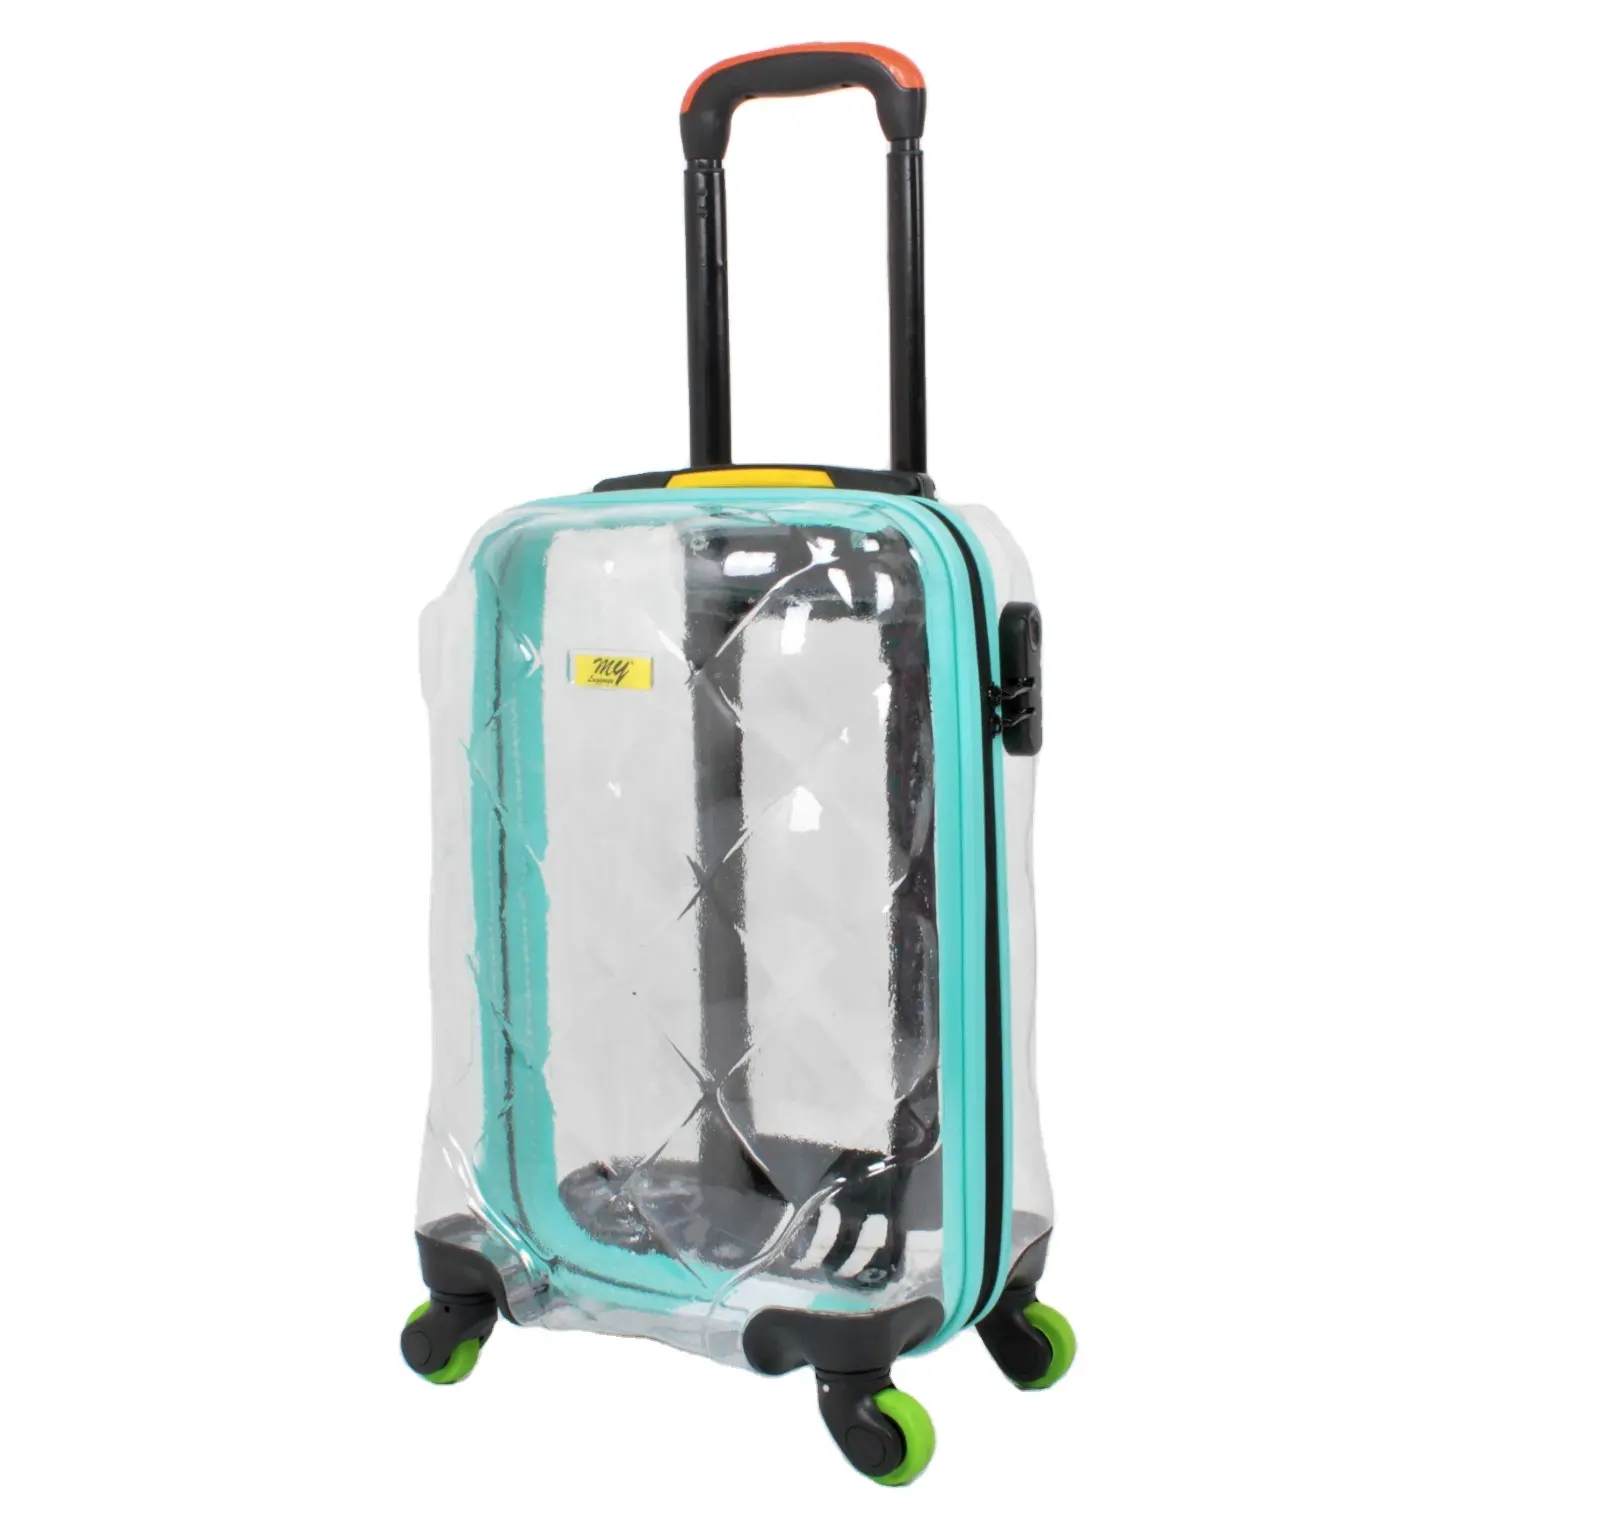 Luggage And Bags New Style Made In TURKEY Transparent Suitcase Luggage 8 Wheel Spinner Travel Sets Trolley Bags Luggage Bag PC